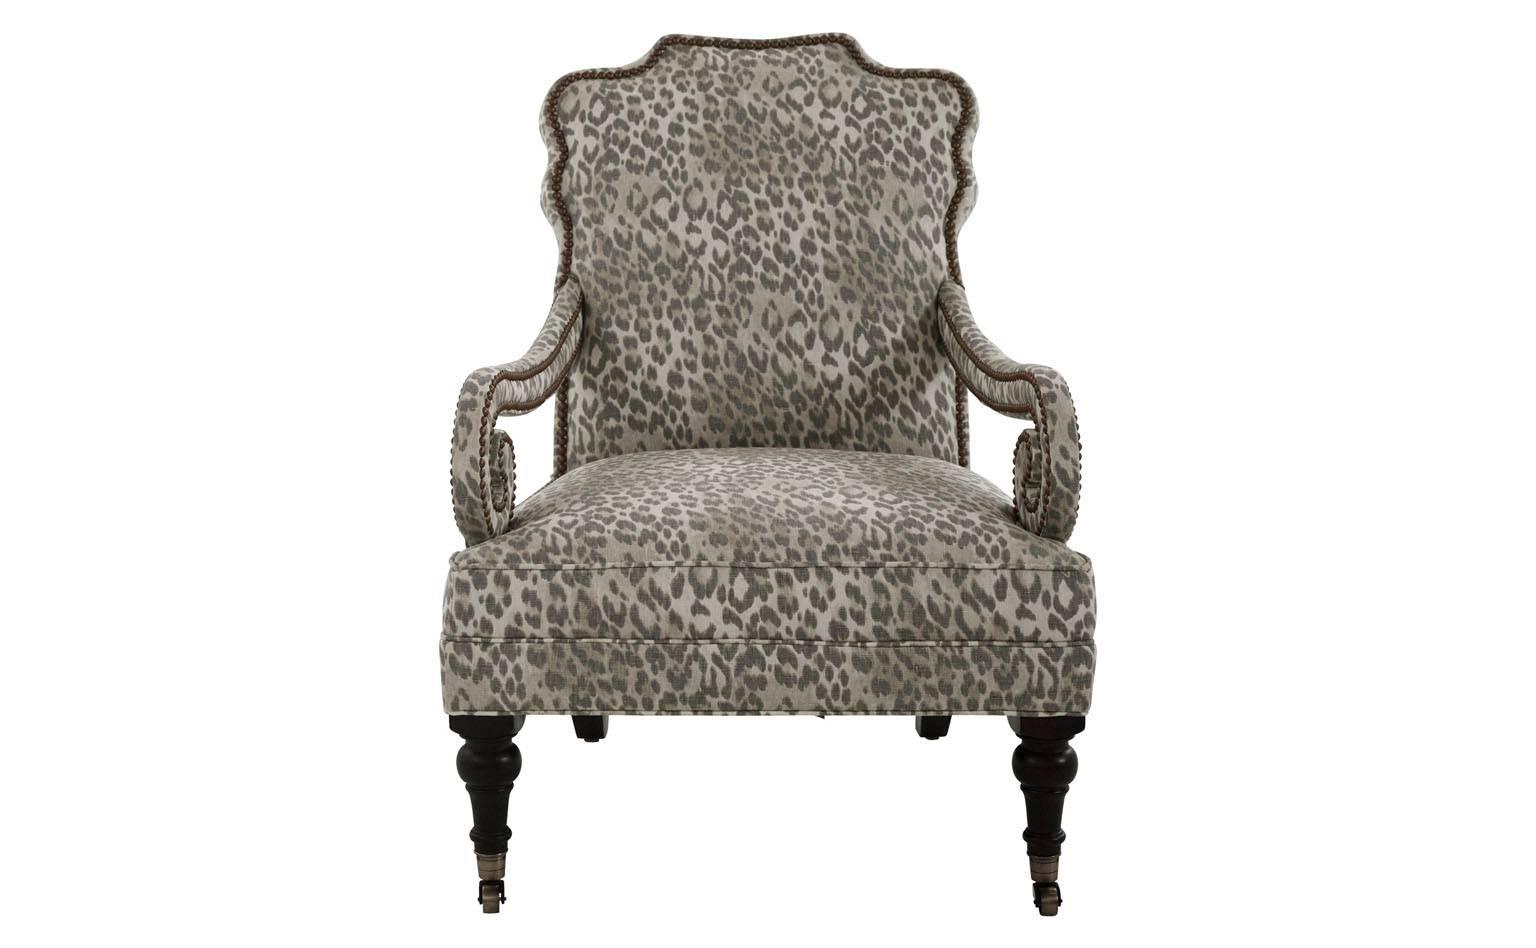 Upholstered in Fernando-alabaster linen
fabric content: 100% Linen
black walnut wood finish
antique brass nailheads 
antique brass casters 
sustainable construction 

Dimensions:
overall: 27